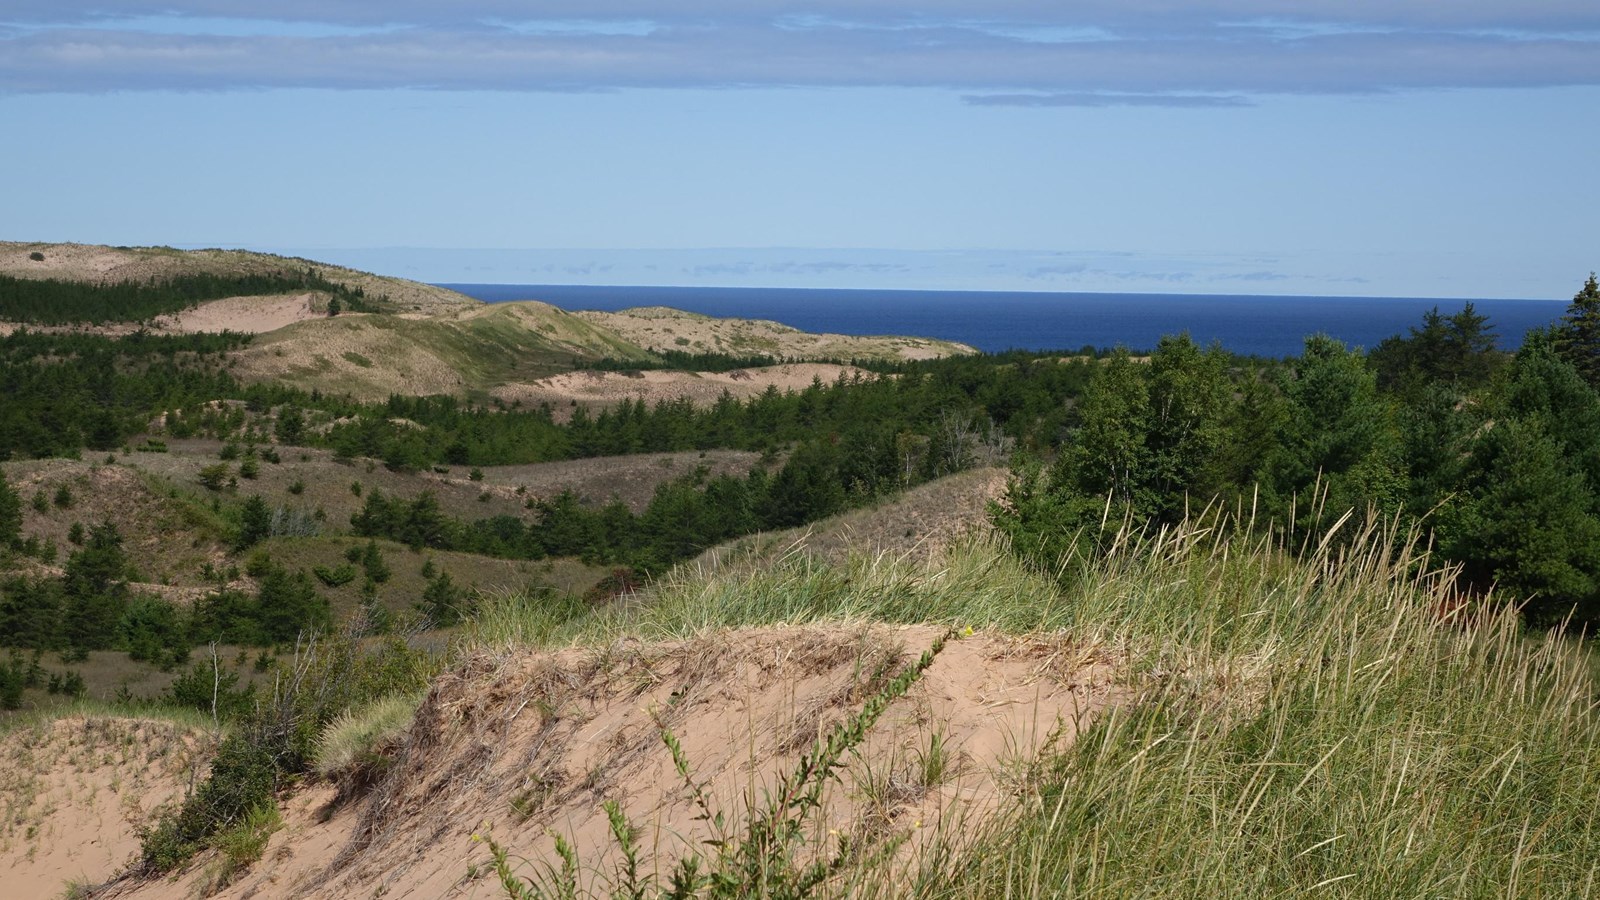 Dune and swale areas well away from the dune face on Lake Superior.